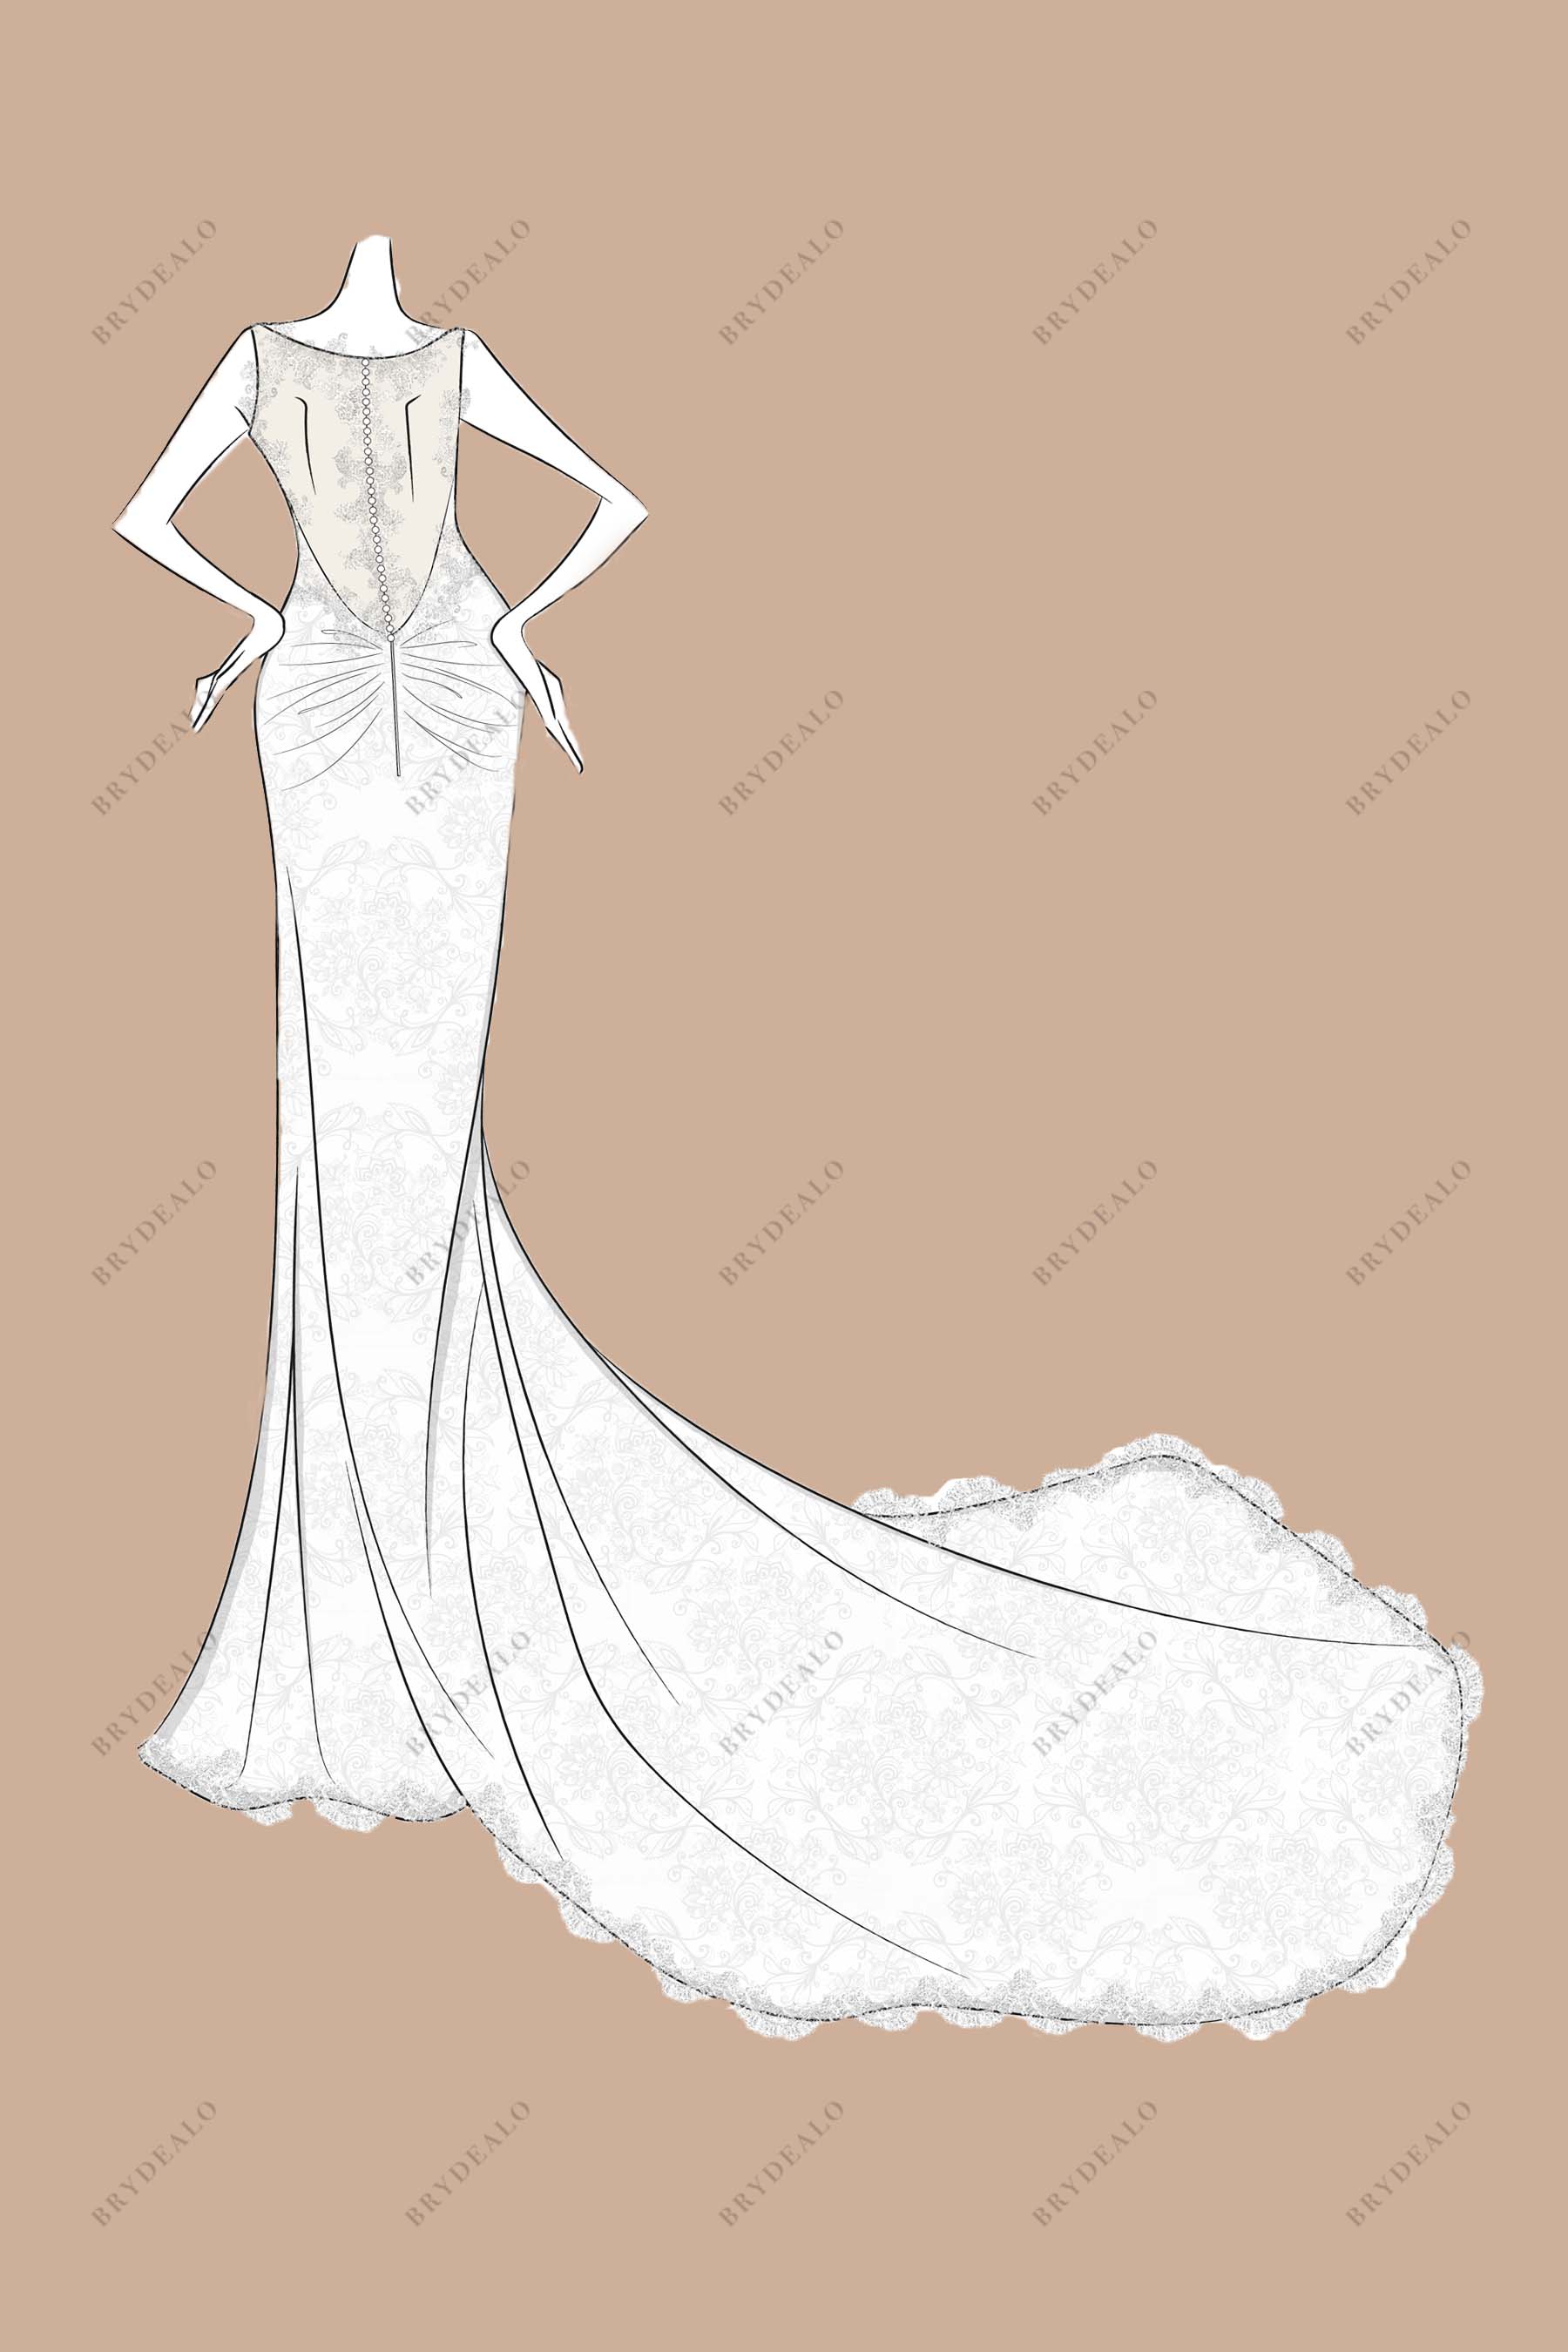 Indian Wedding Dresses Design Sketches: Fashion Design Book with Figure  Template to Draw and Design the Perfect Bridal Gown: MARJB Design  Skechbooks: 9781709259326: Amazon.com: Books